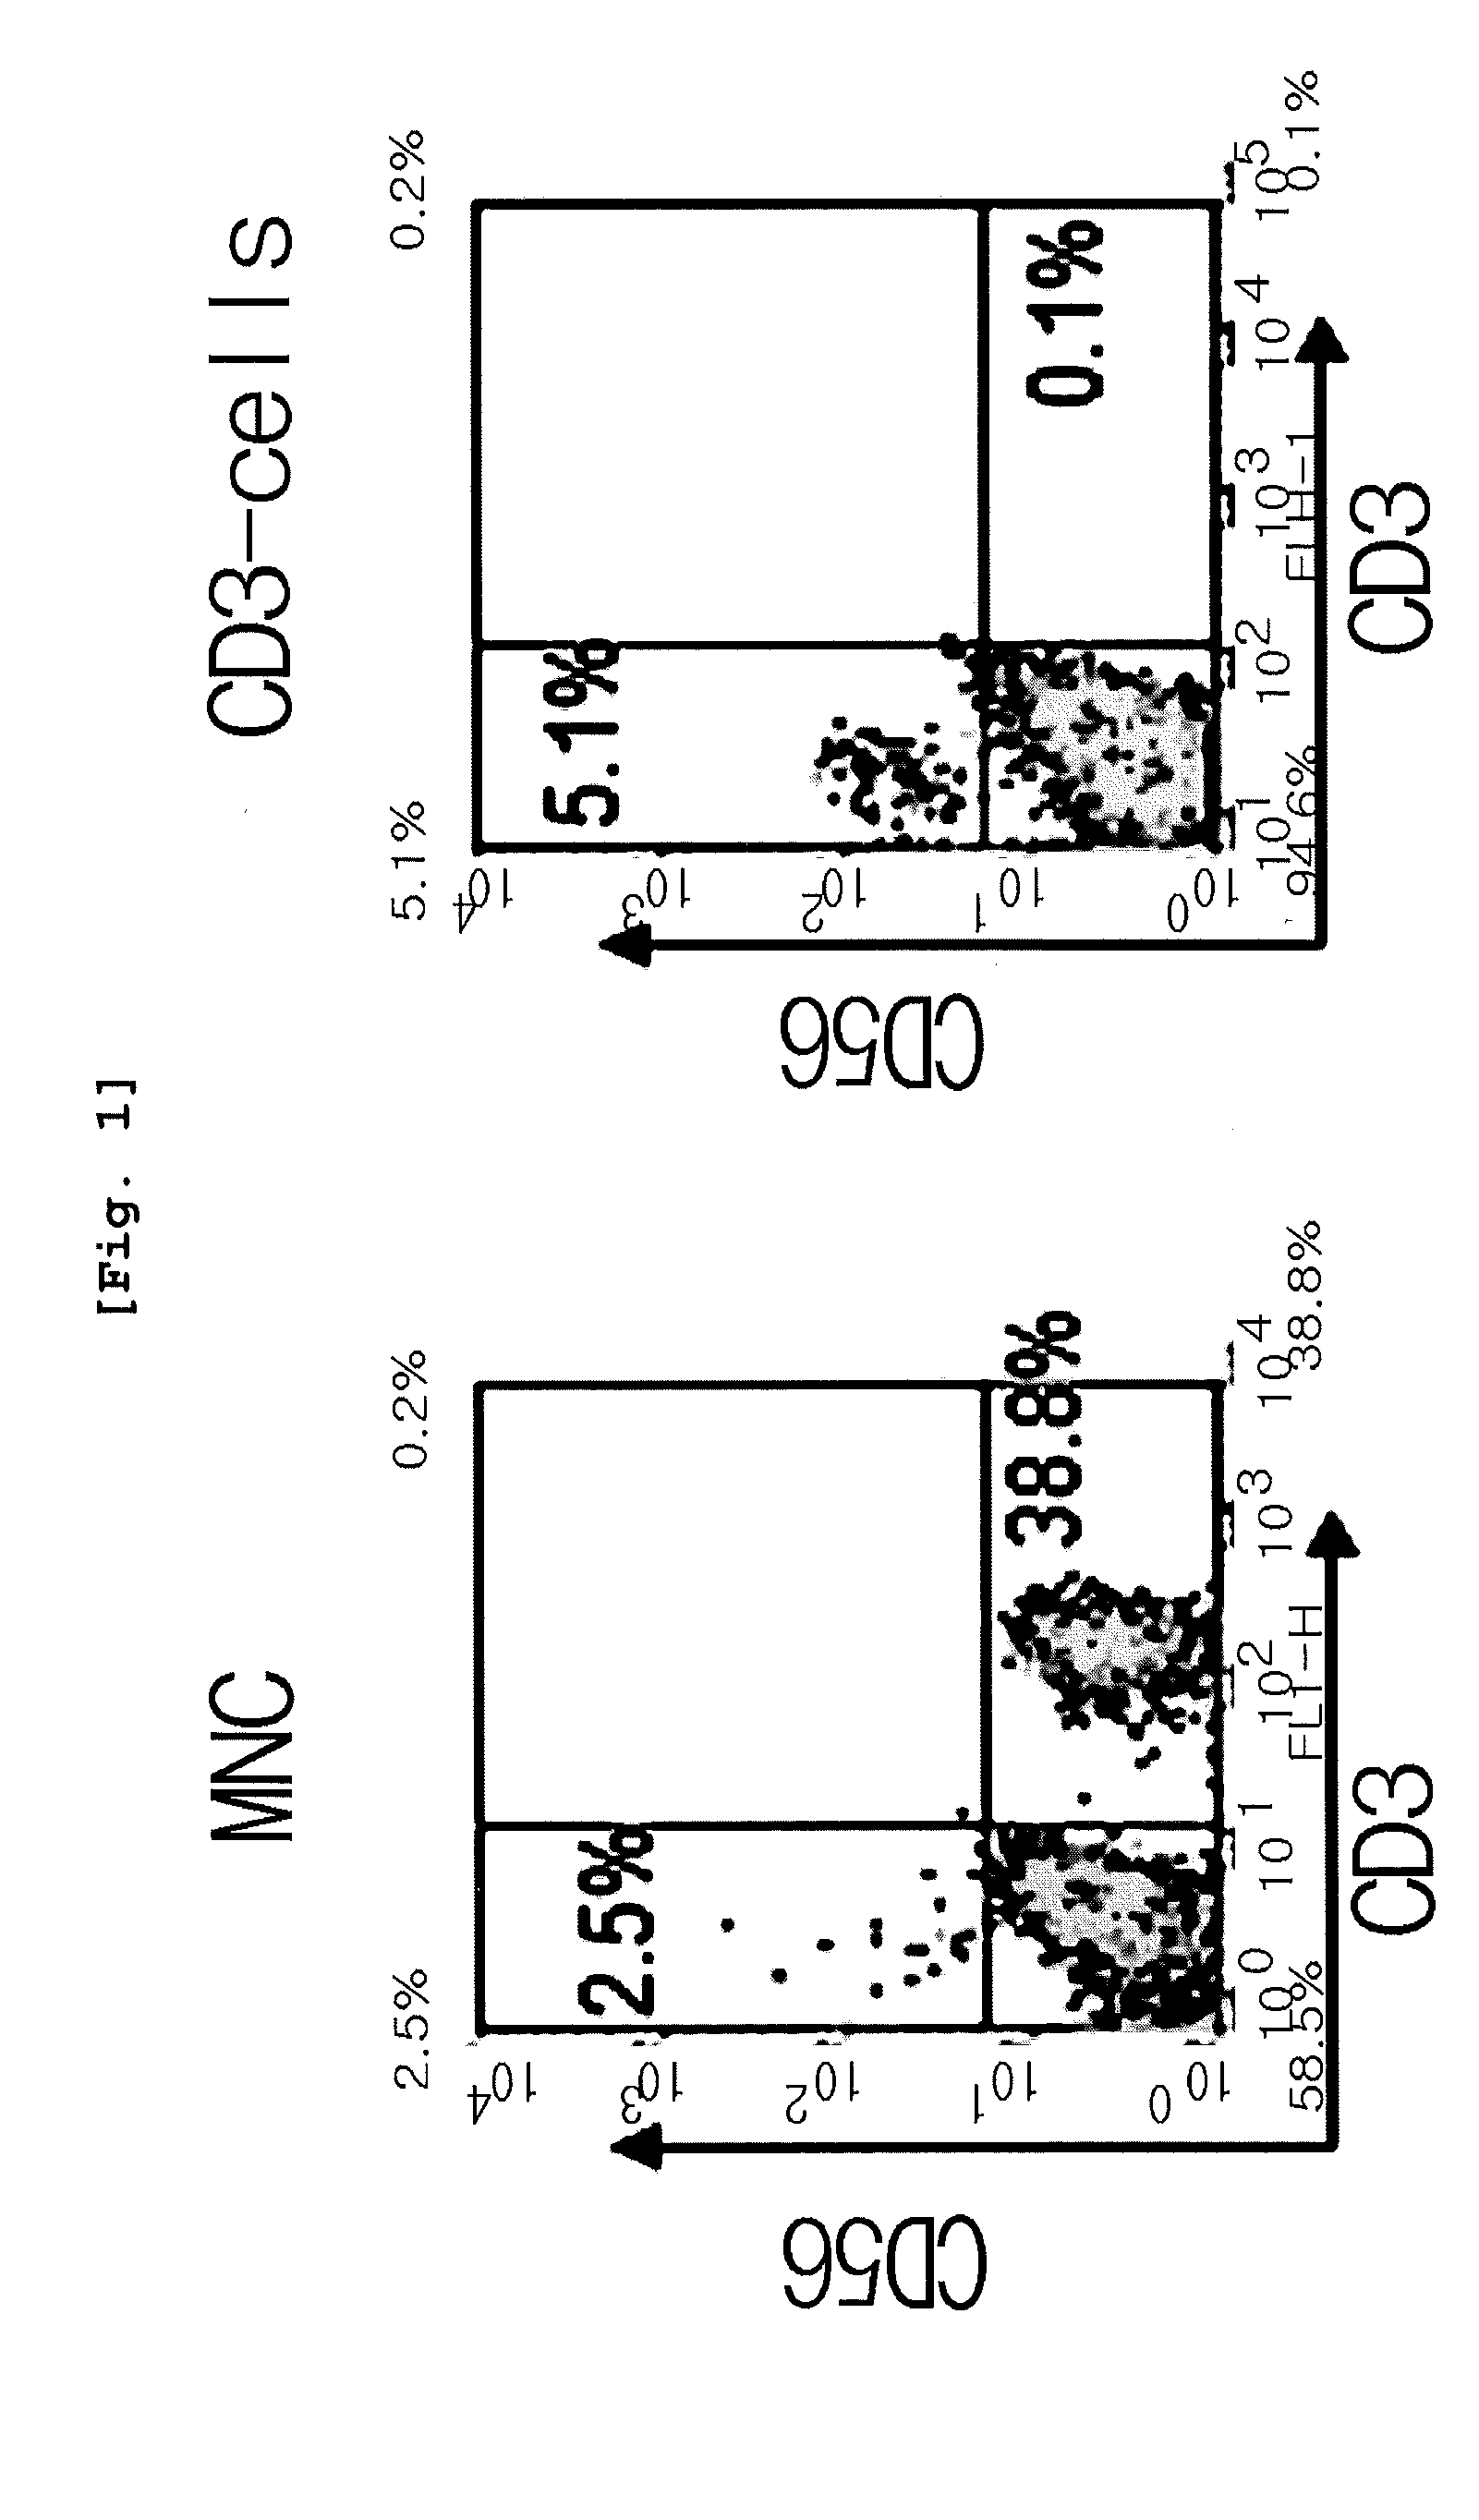 Method for Efficiently Proliferating and Differentiating Natural Killer Cells from Umbilical Cord Blood